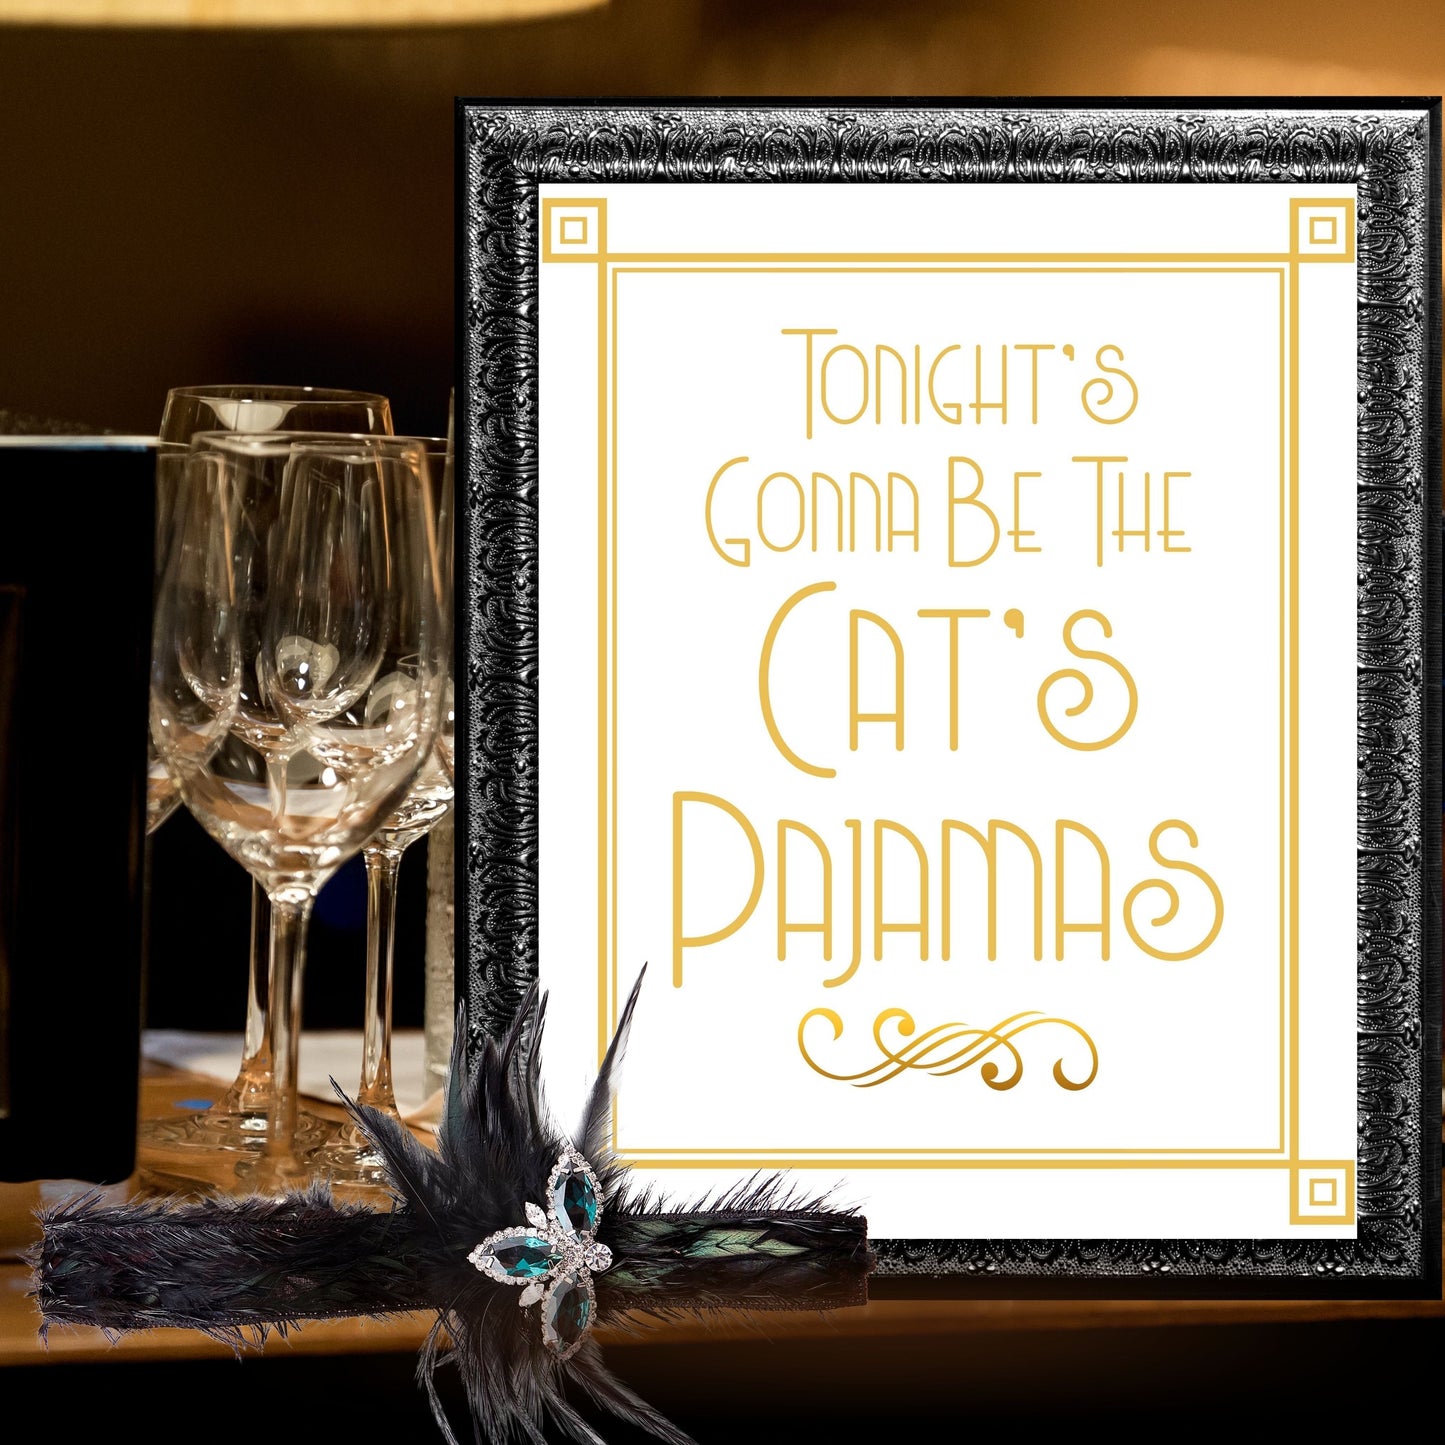 Set Of 6 Printable Party Signs For Great Gatsby Or Roaring 20's Party Or Wedding, White & Gold, Printable Party Decor